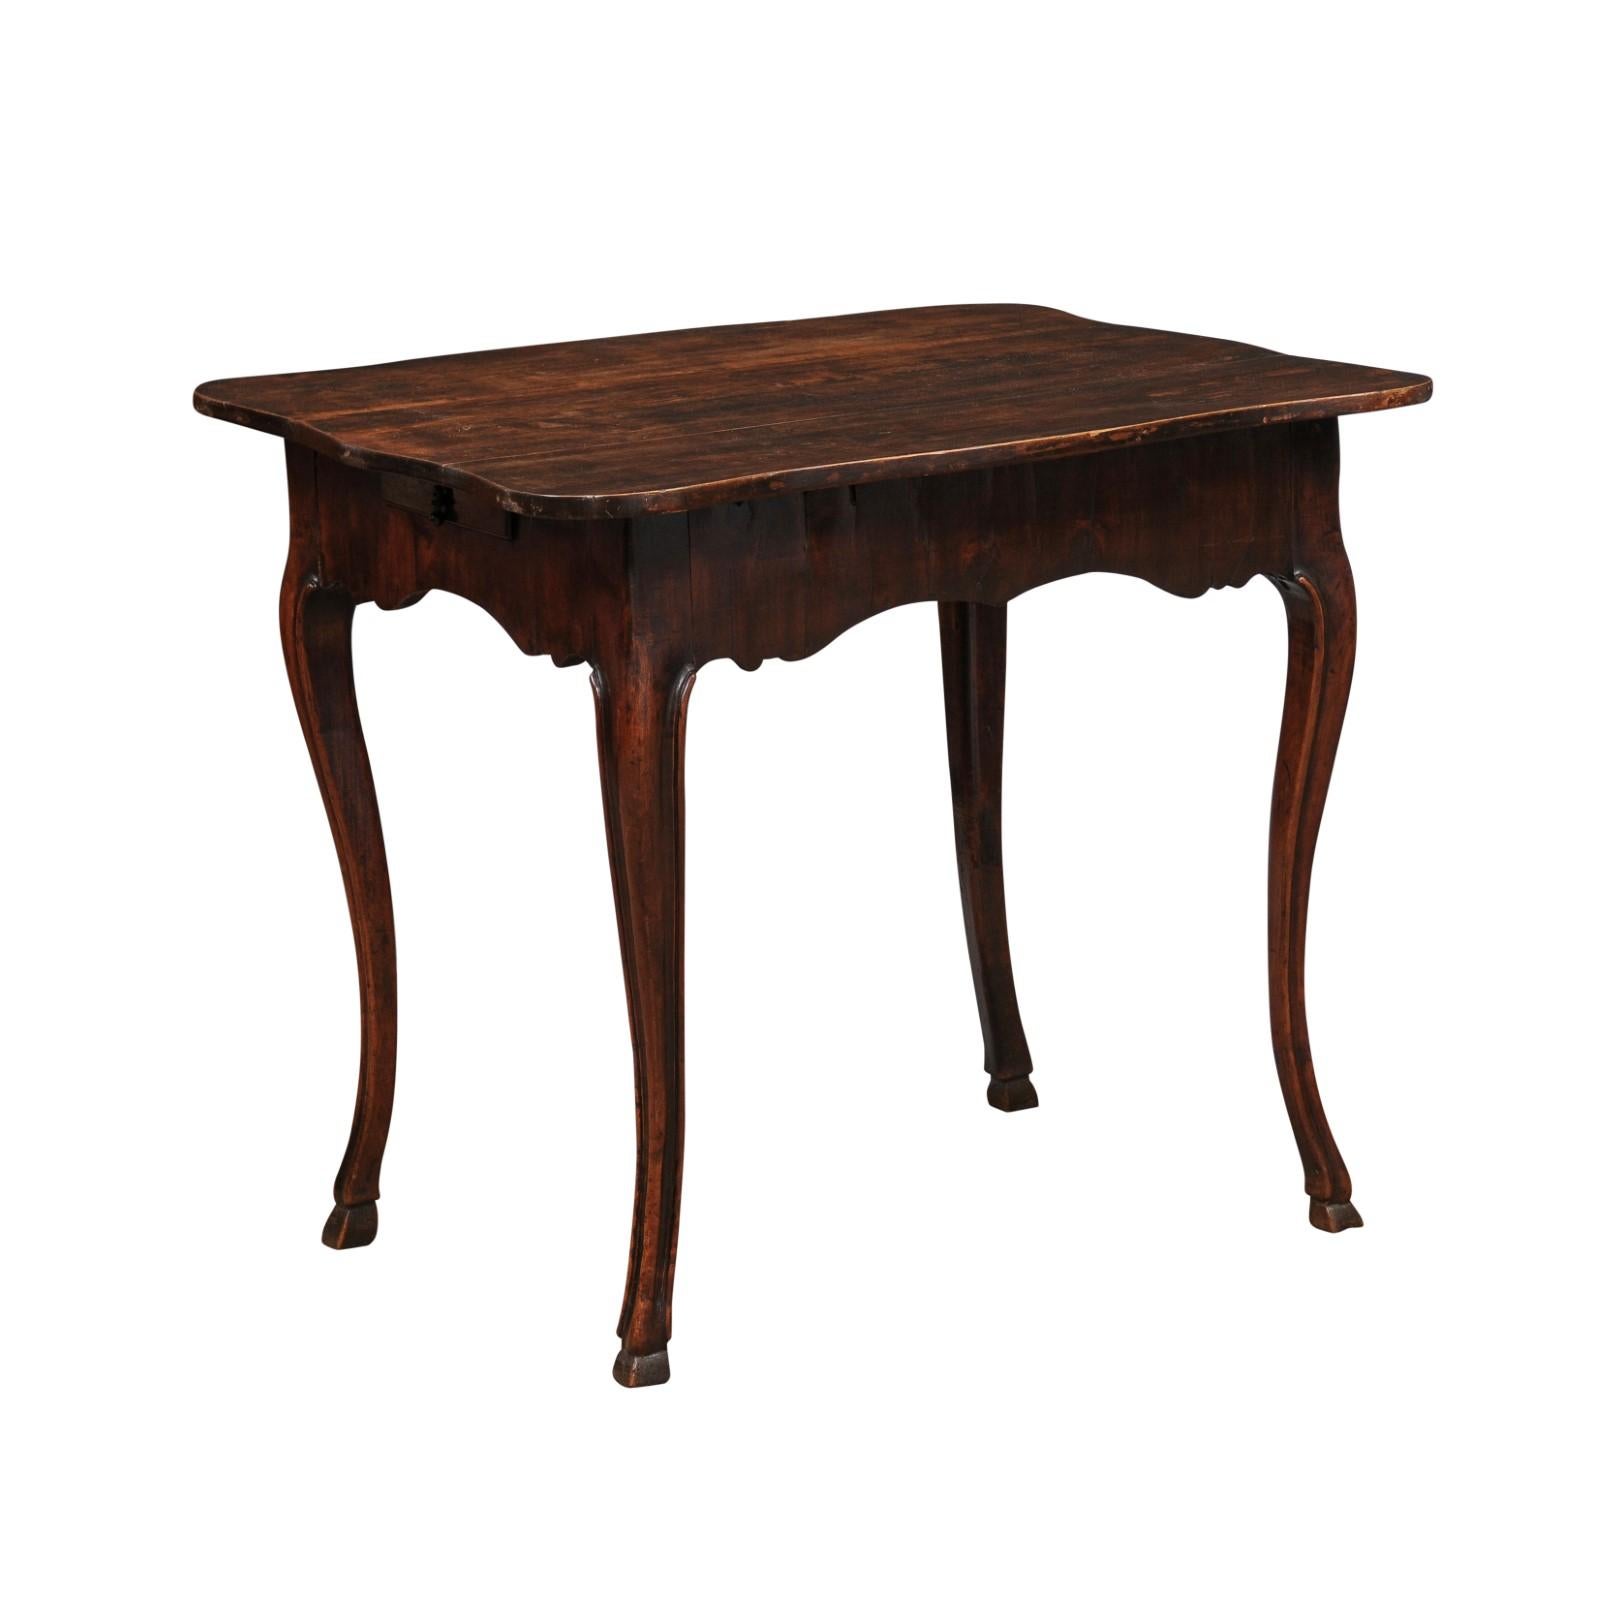 French Walnut Louis XV Table with Shaped Top, Hoof Feet & 2 Drawers. 18th Century and Later.